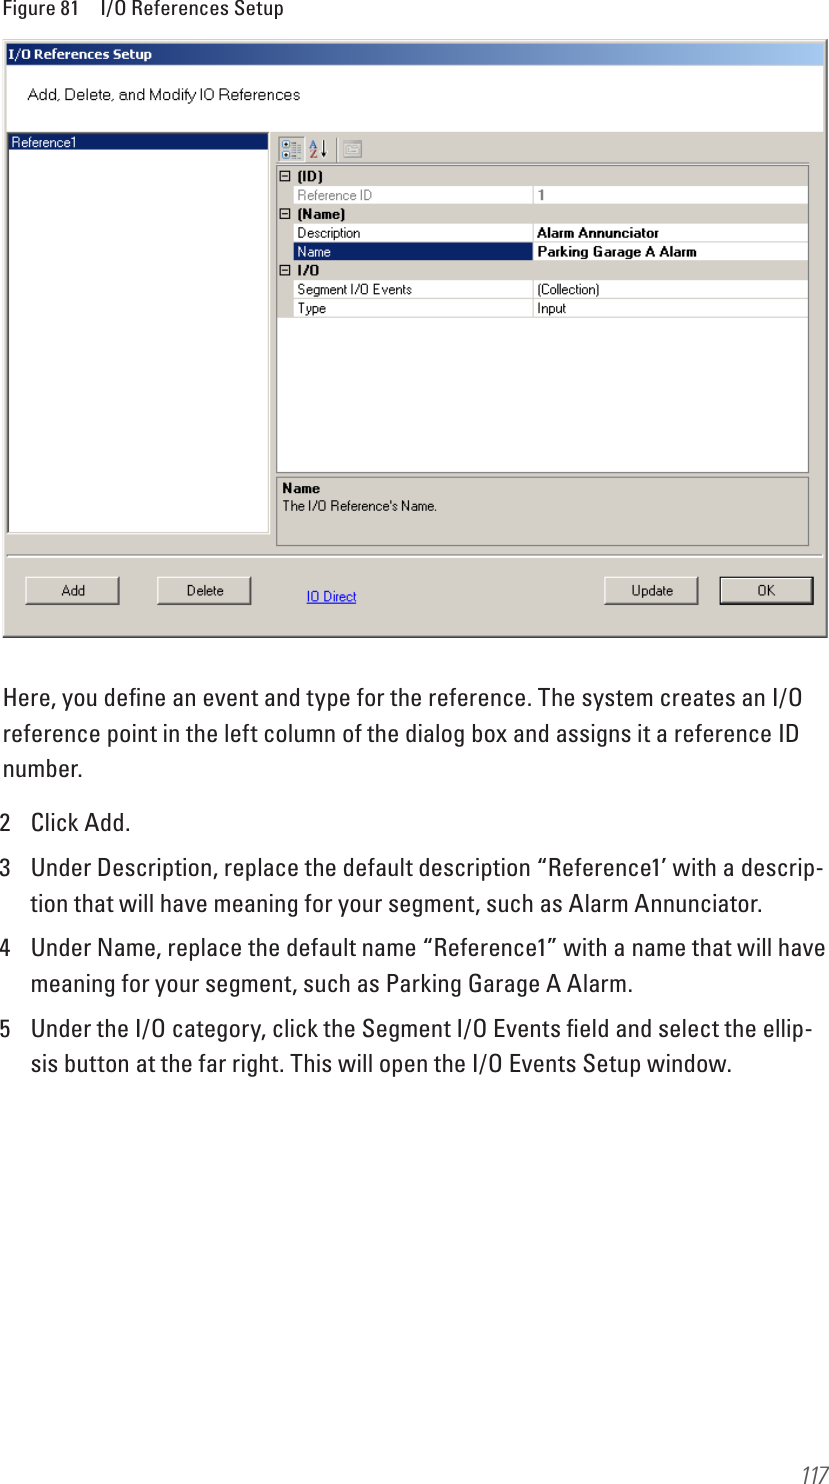 117Figure 81  I/O References SetupHere, you deﬁne an event and type for the reference. The system creates an I/O reference point in the left column of the dialog box and assigns it a reference ID number. 2  Click Add.3  Under Description, replace the default description “Reference1’ with a descrip-tion that will have meaning for your segment, such as Alarm Annunciator.4  Under Name, replace the default name “Reference1” with a name that will have meaning for your segment, such as Parking Garage A Alarm.5  Under the I/O category, click the Segment I/O Events ﬁeld and select the ellip-sis button at the far right. This will open the I/O Events Setup window.